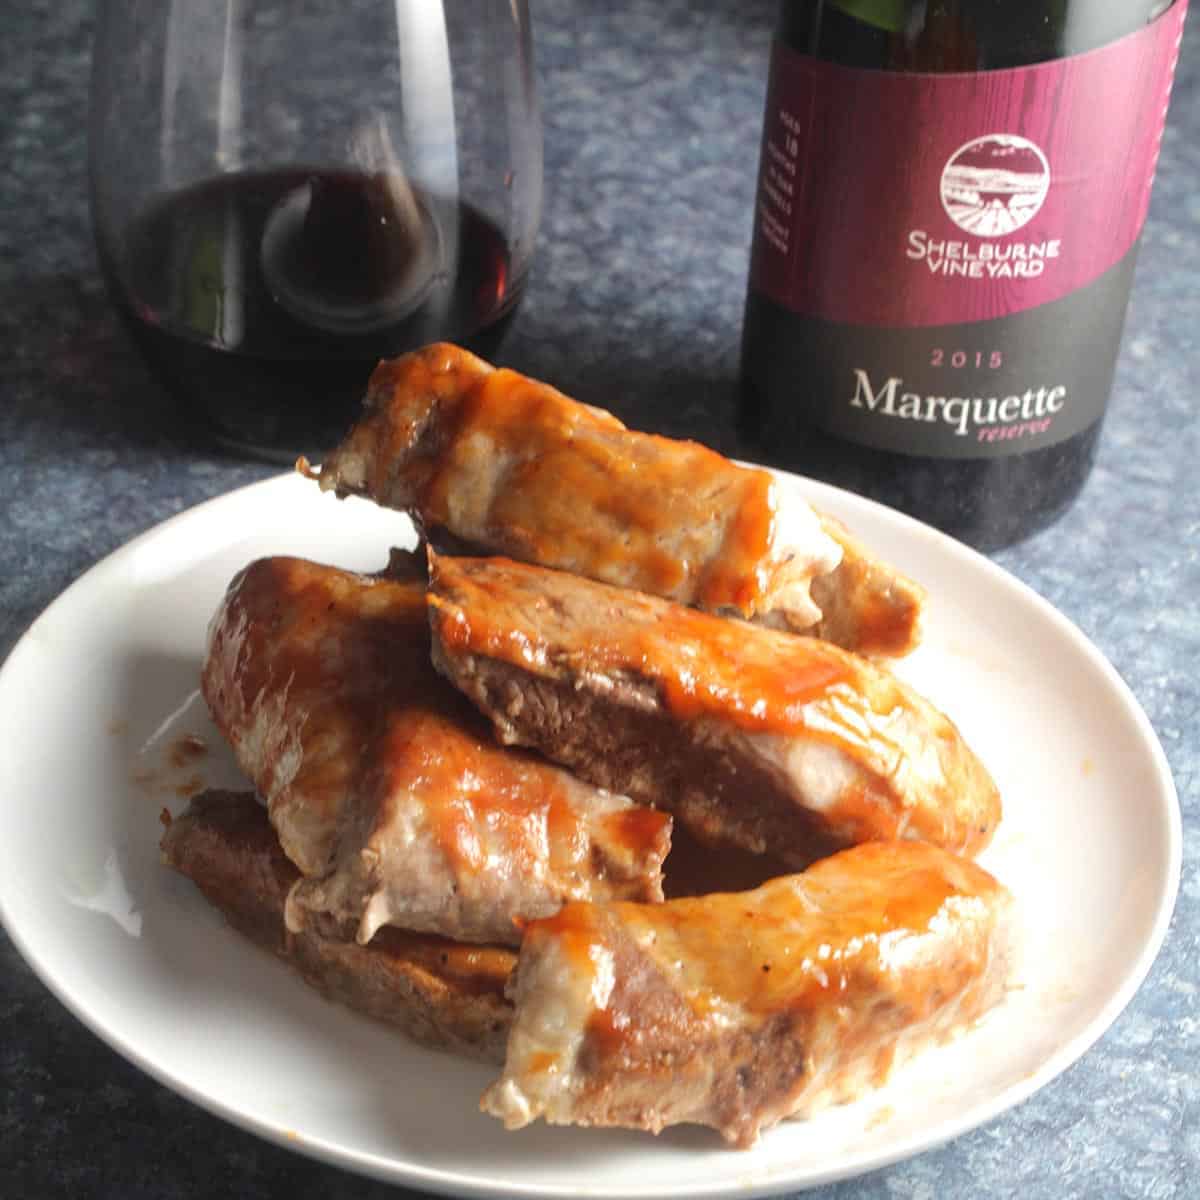 baked boneless pork ribs served on a plate with a bottle of red wine.